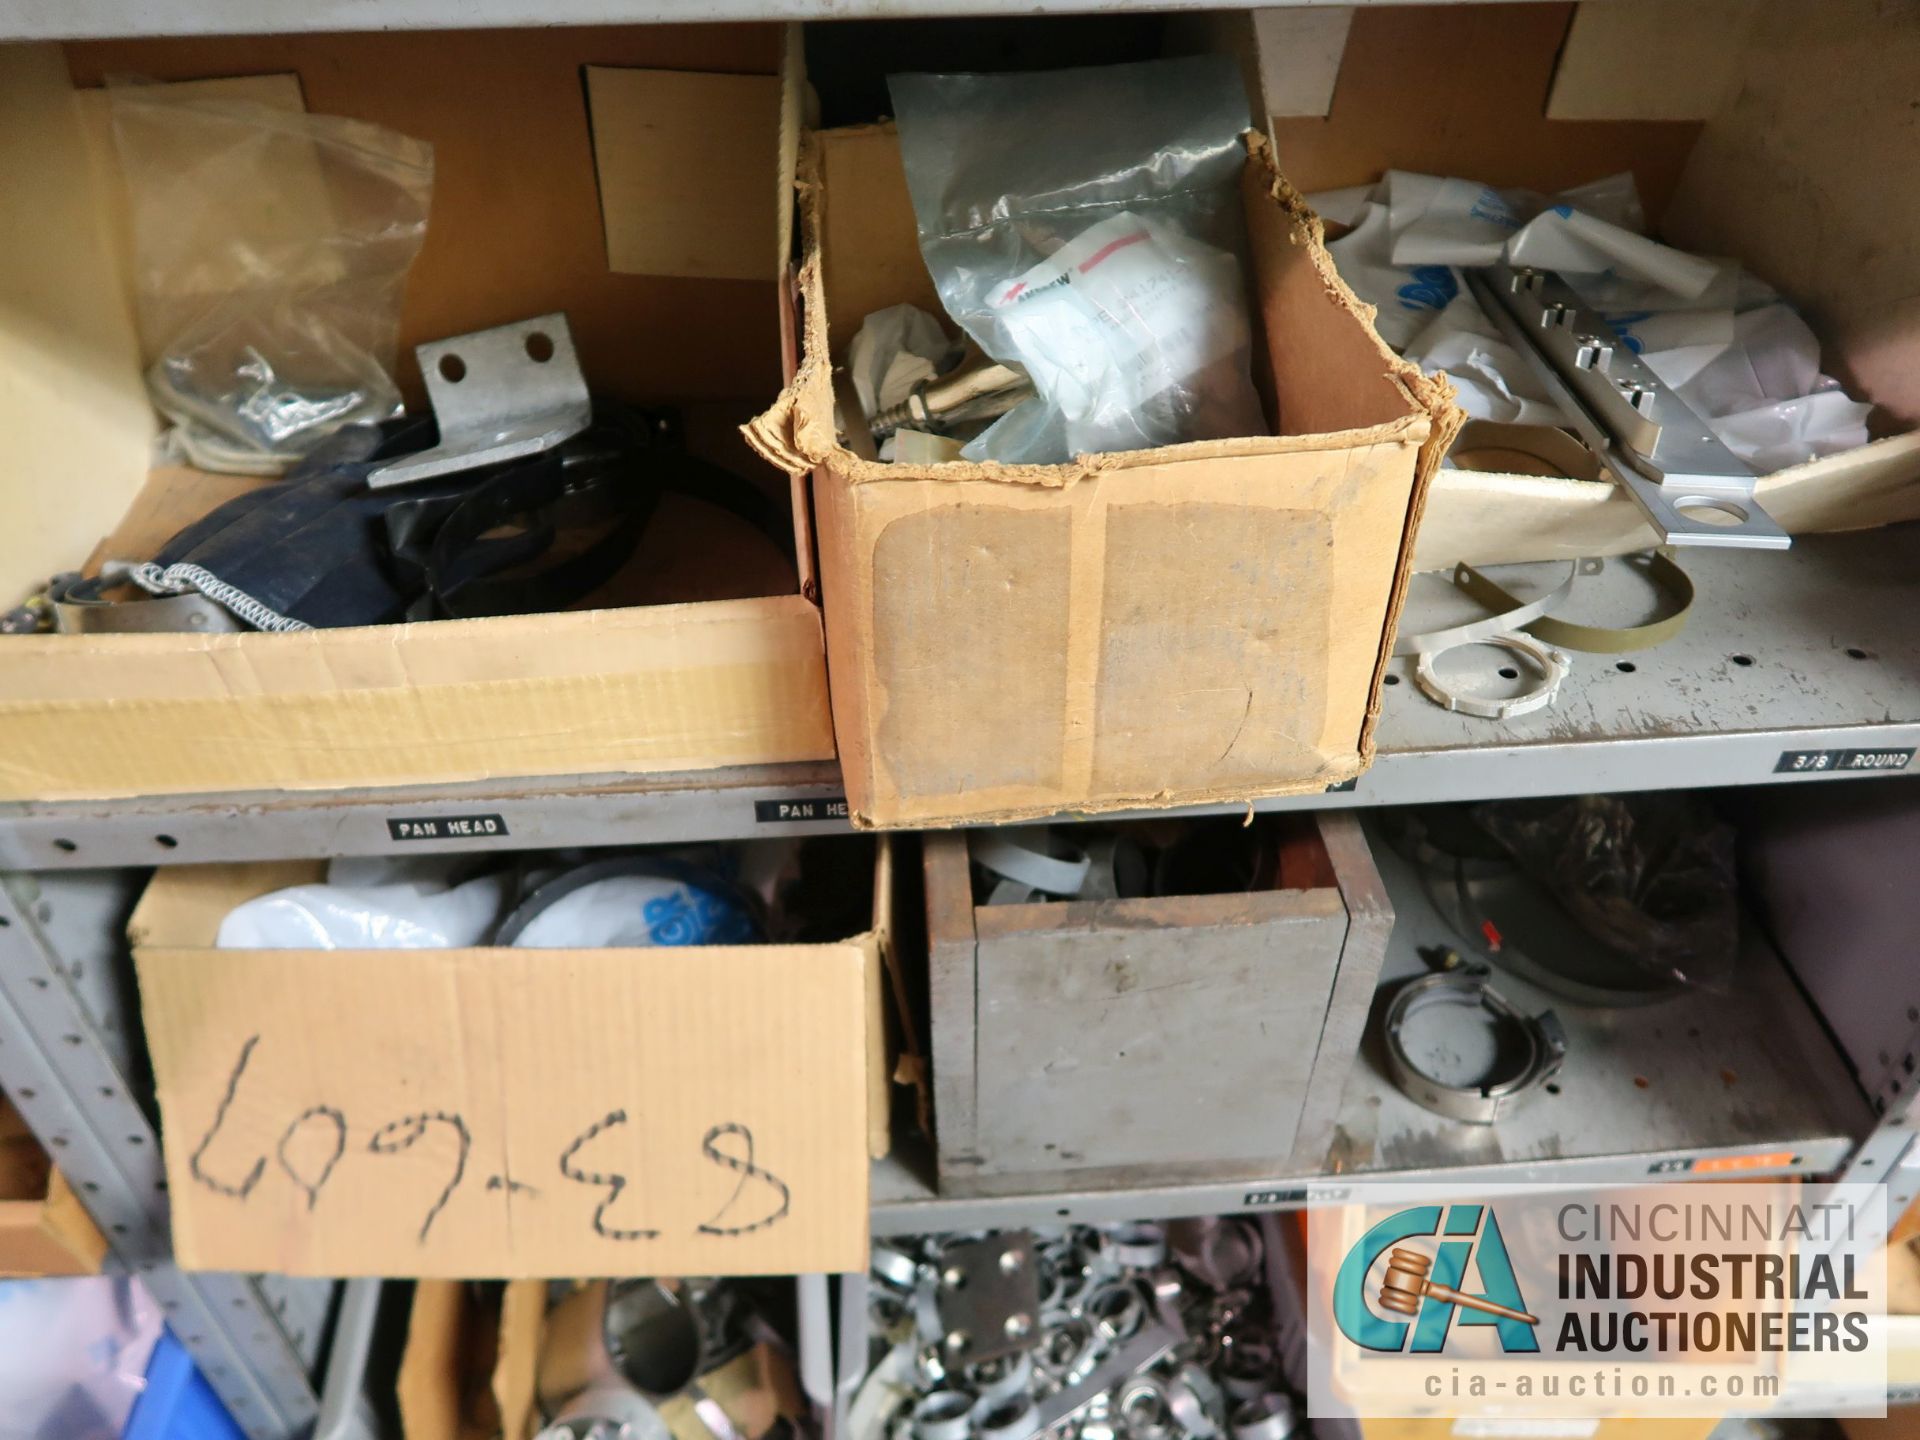 CONTENTS OF (7) SHELVES INCLUDING MISCELLANEOUS BRACKETS, CLAMPS, HINGES **NO SHELVES** - Image 14 of 19